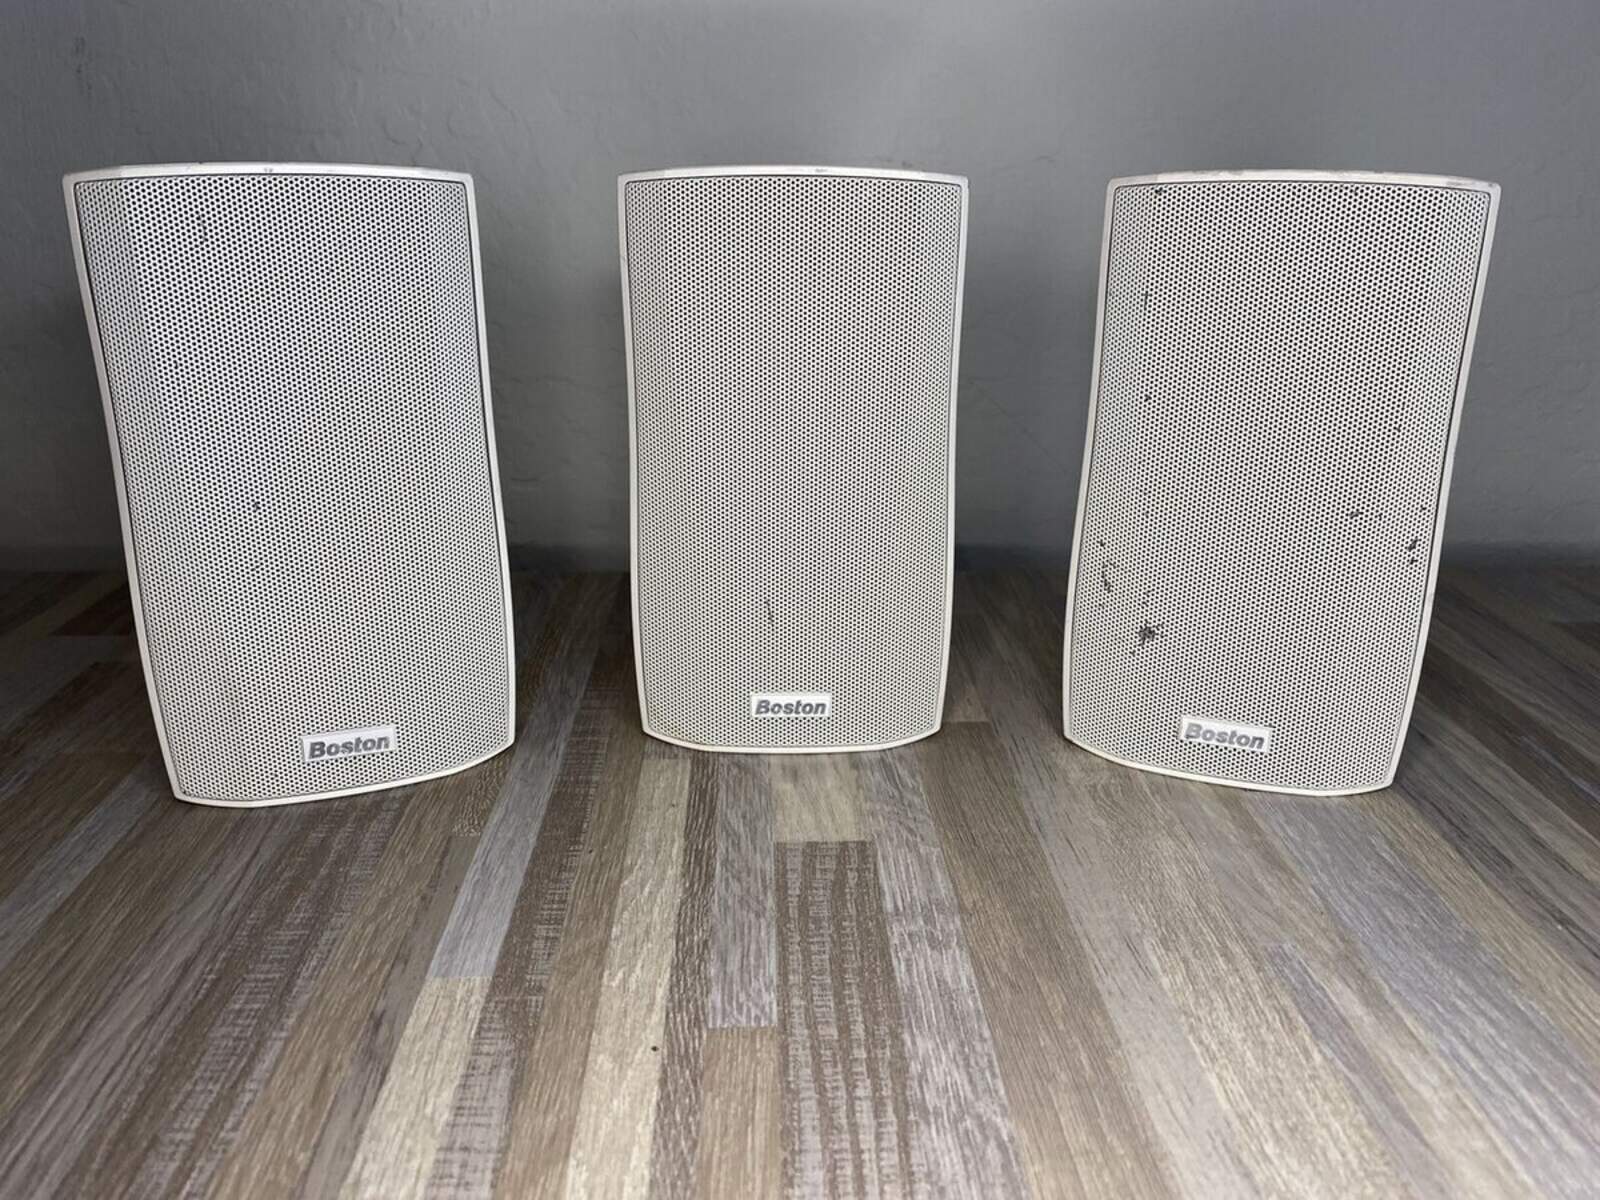 Boston Acoustic Surround Sound System: How To Tell Speakers Apart